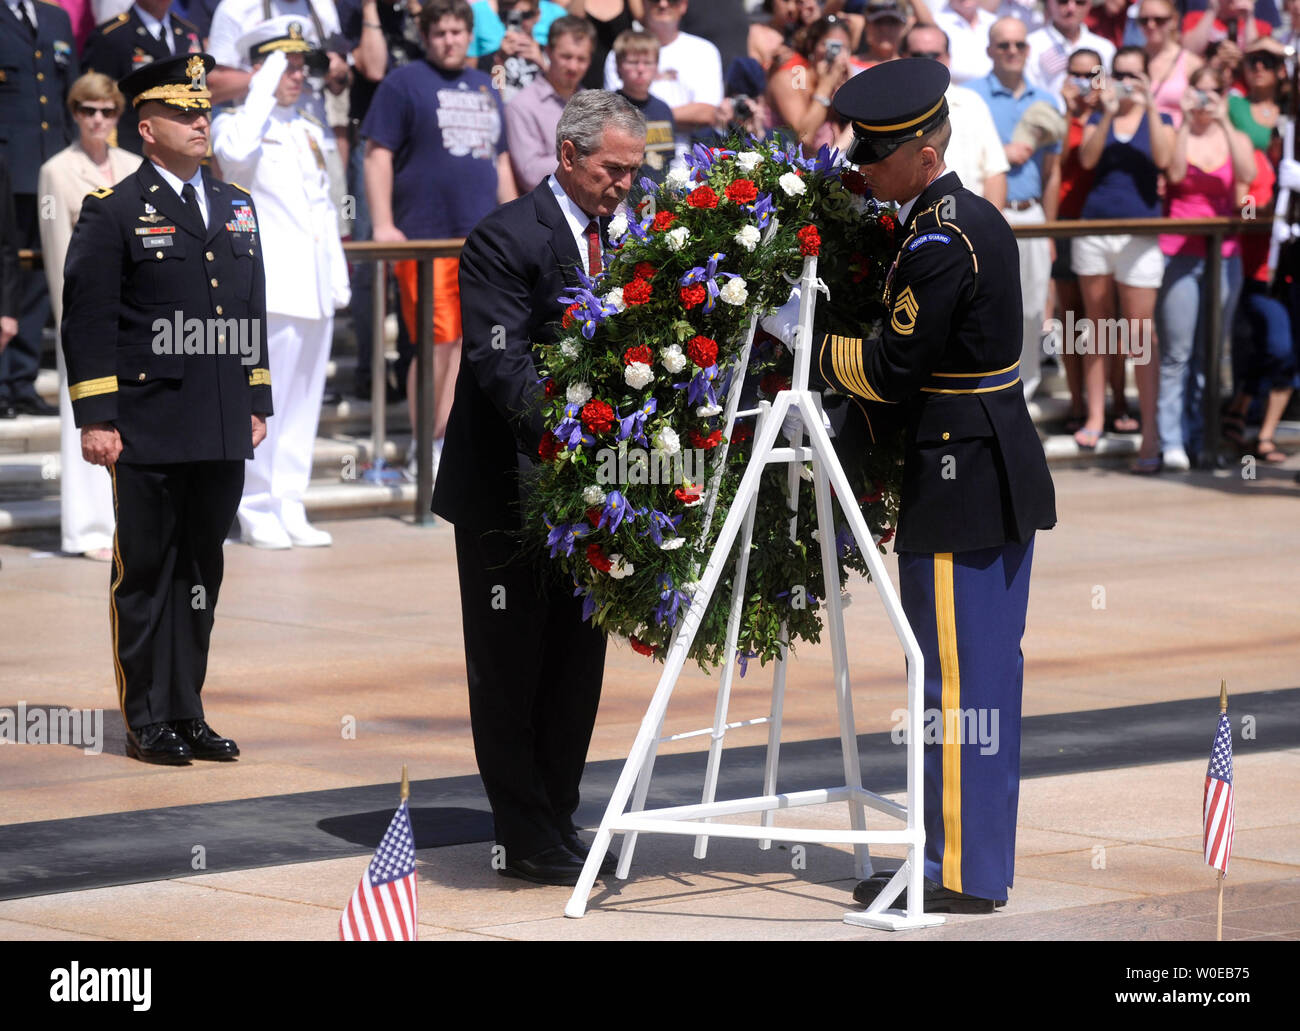 U.S. President George W. Bush (C), Gen. Richard J. Rowe Jr. (L) and a member of the Army Honor Guard participate in a wreath laying ceremony at the Tomb of the Unknown Soldiers at Arlington National Cemetary on Memorial Day, May 26, 2008 in Arlington, Virginia. (UPI Photo/Kevin Dietsch) Stock Photo